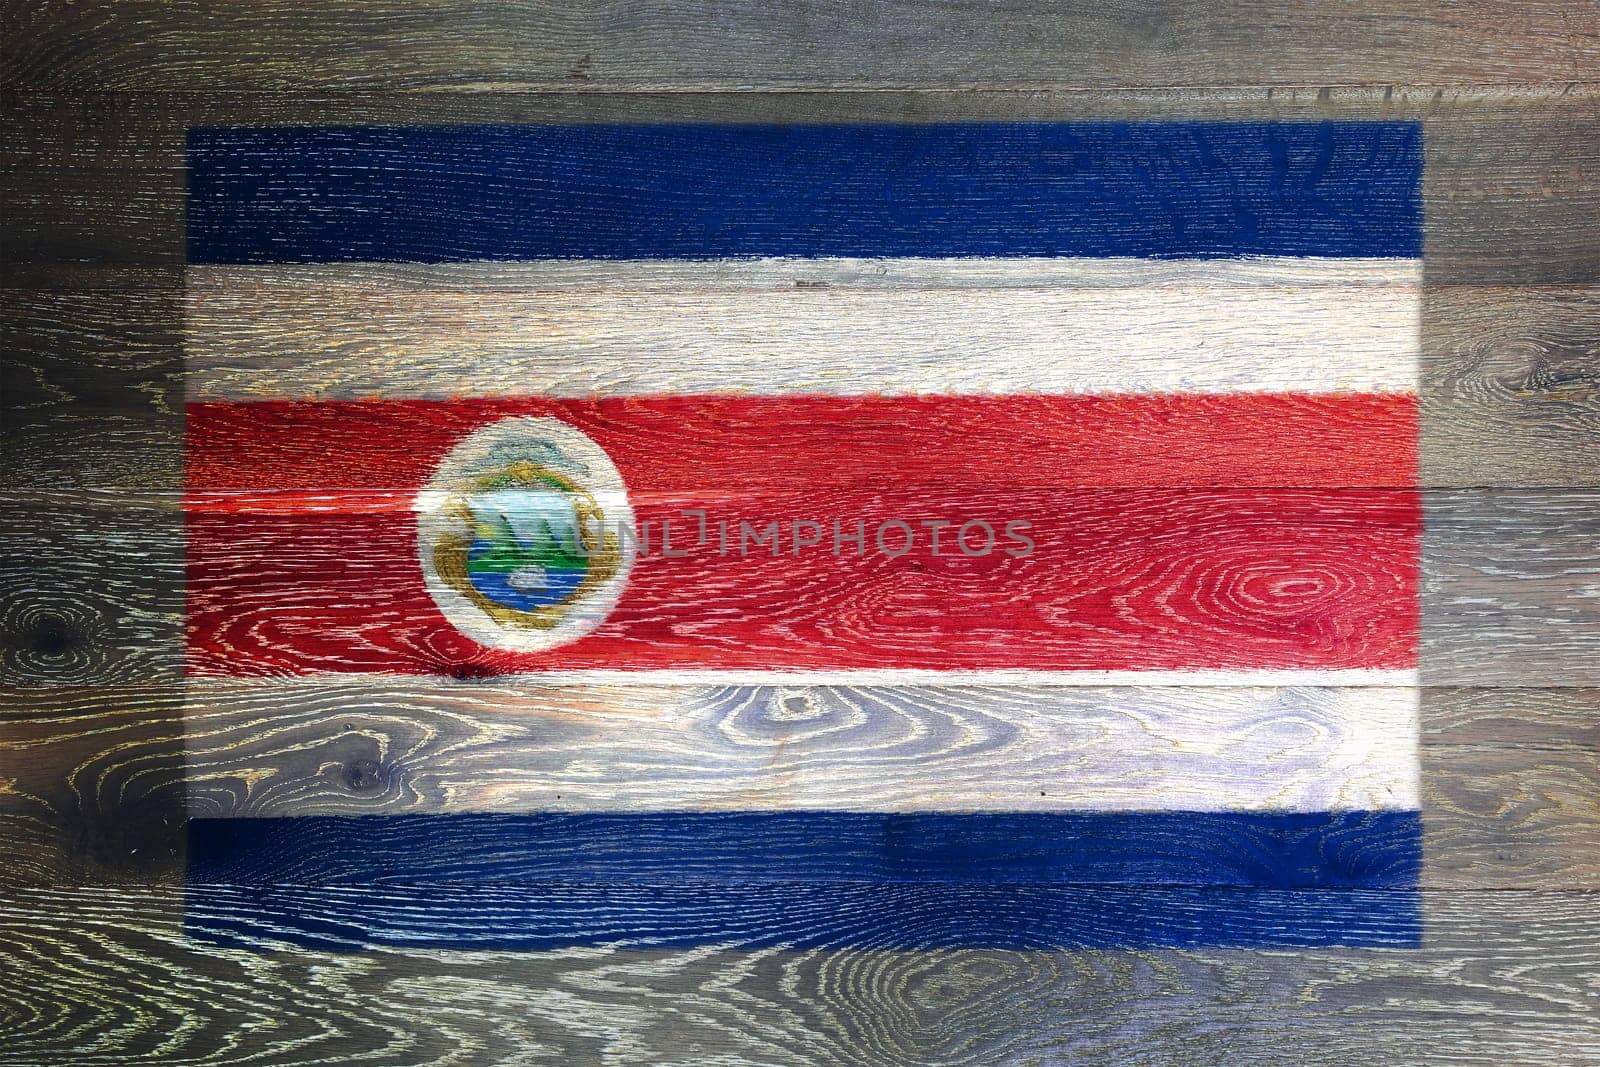 Costa Rica flag on rustic old wood surface background by VivacityImages